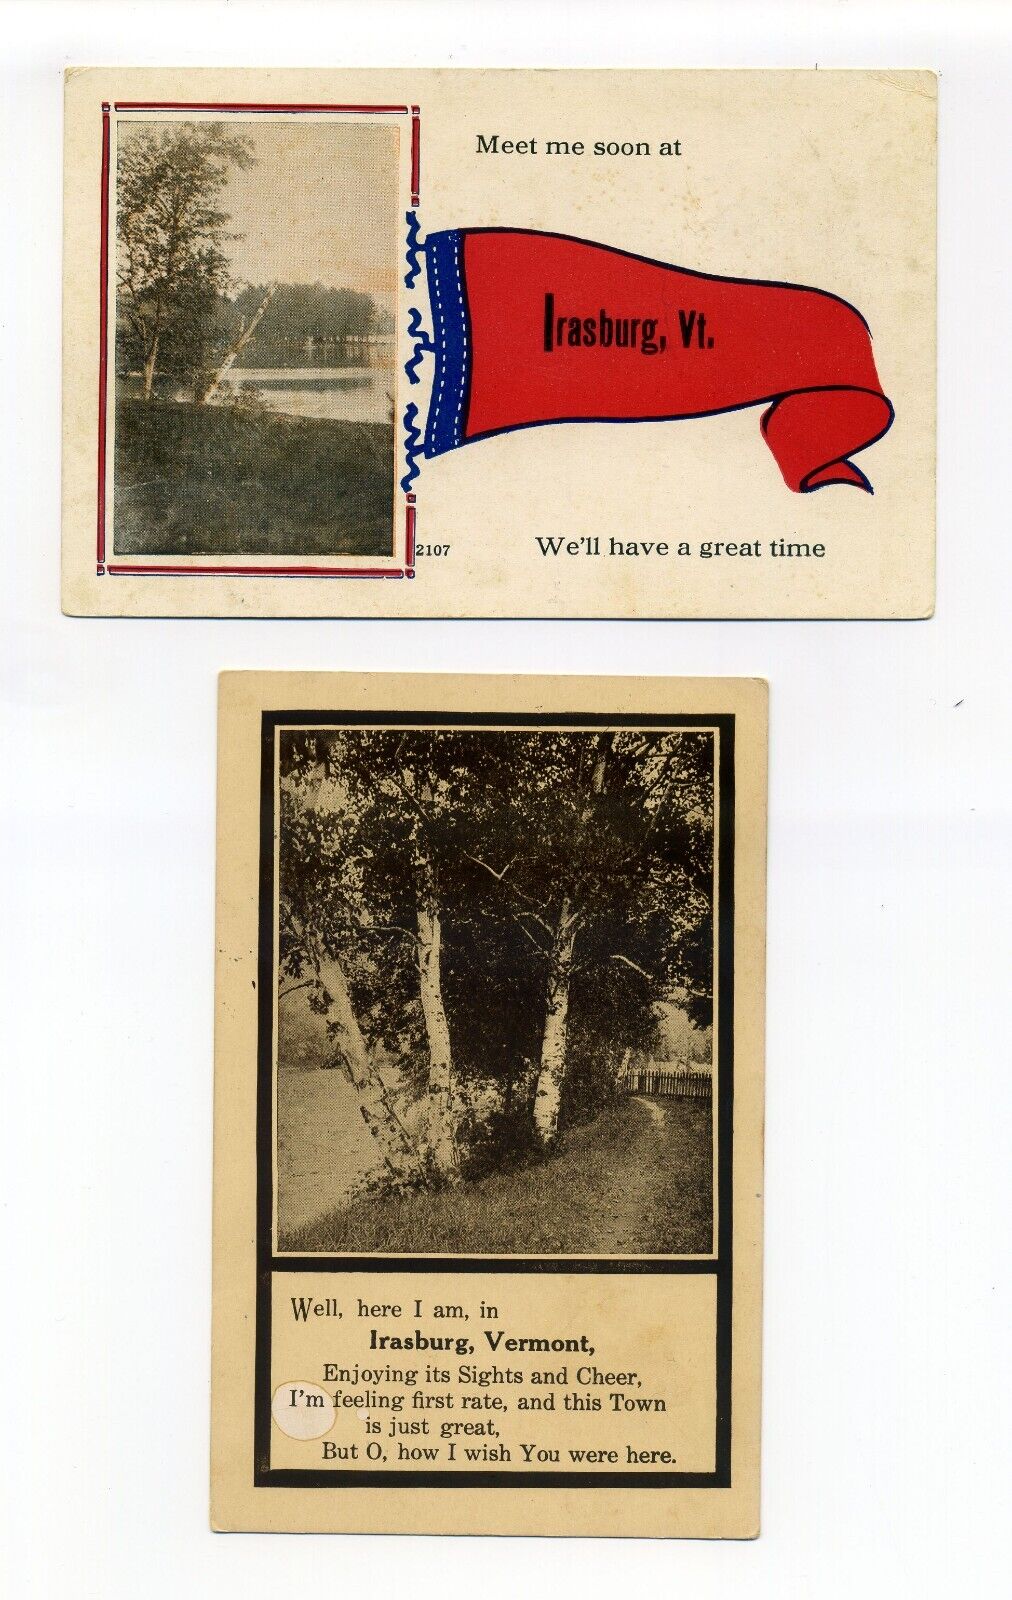 Irasburg VT lot of 2 postcards, 1 pennant, 1 poem, wish you were here